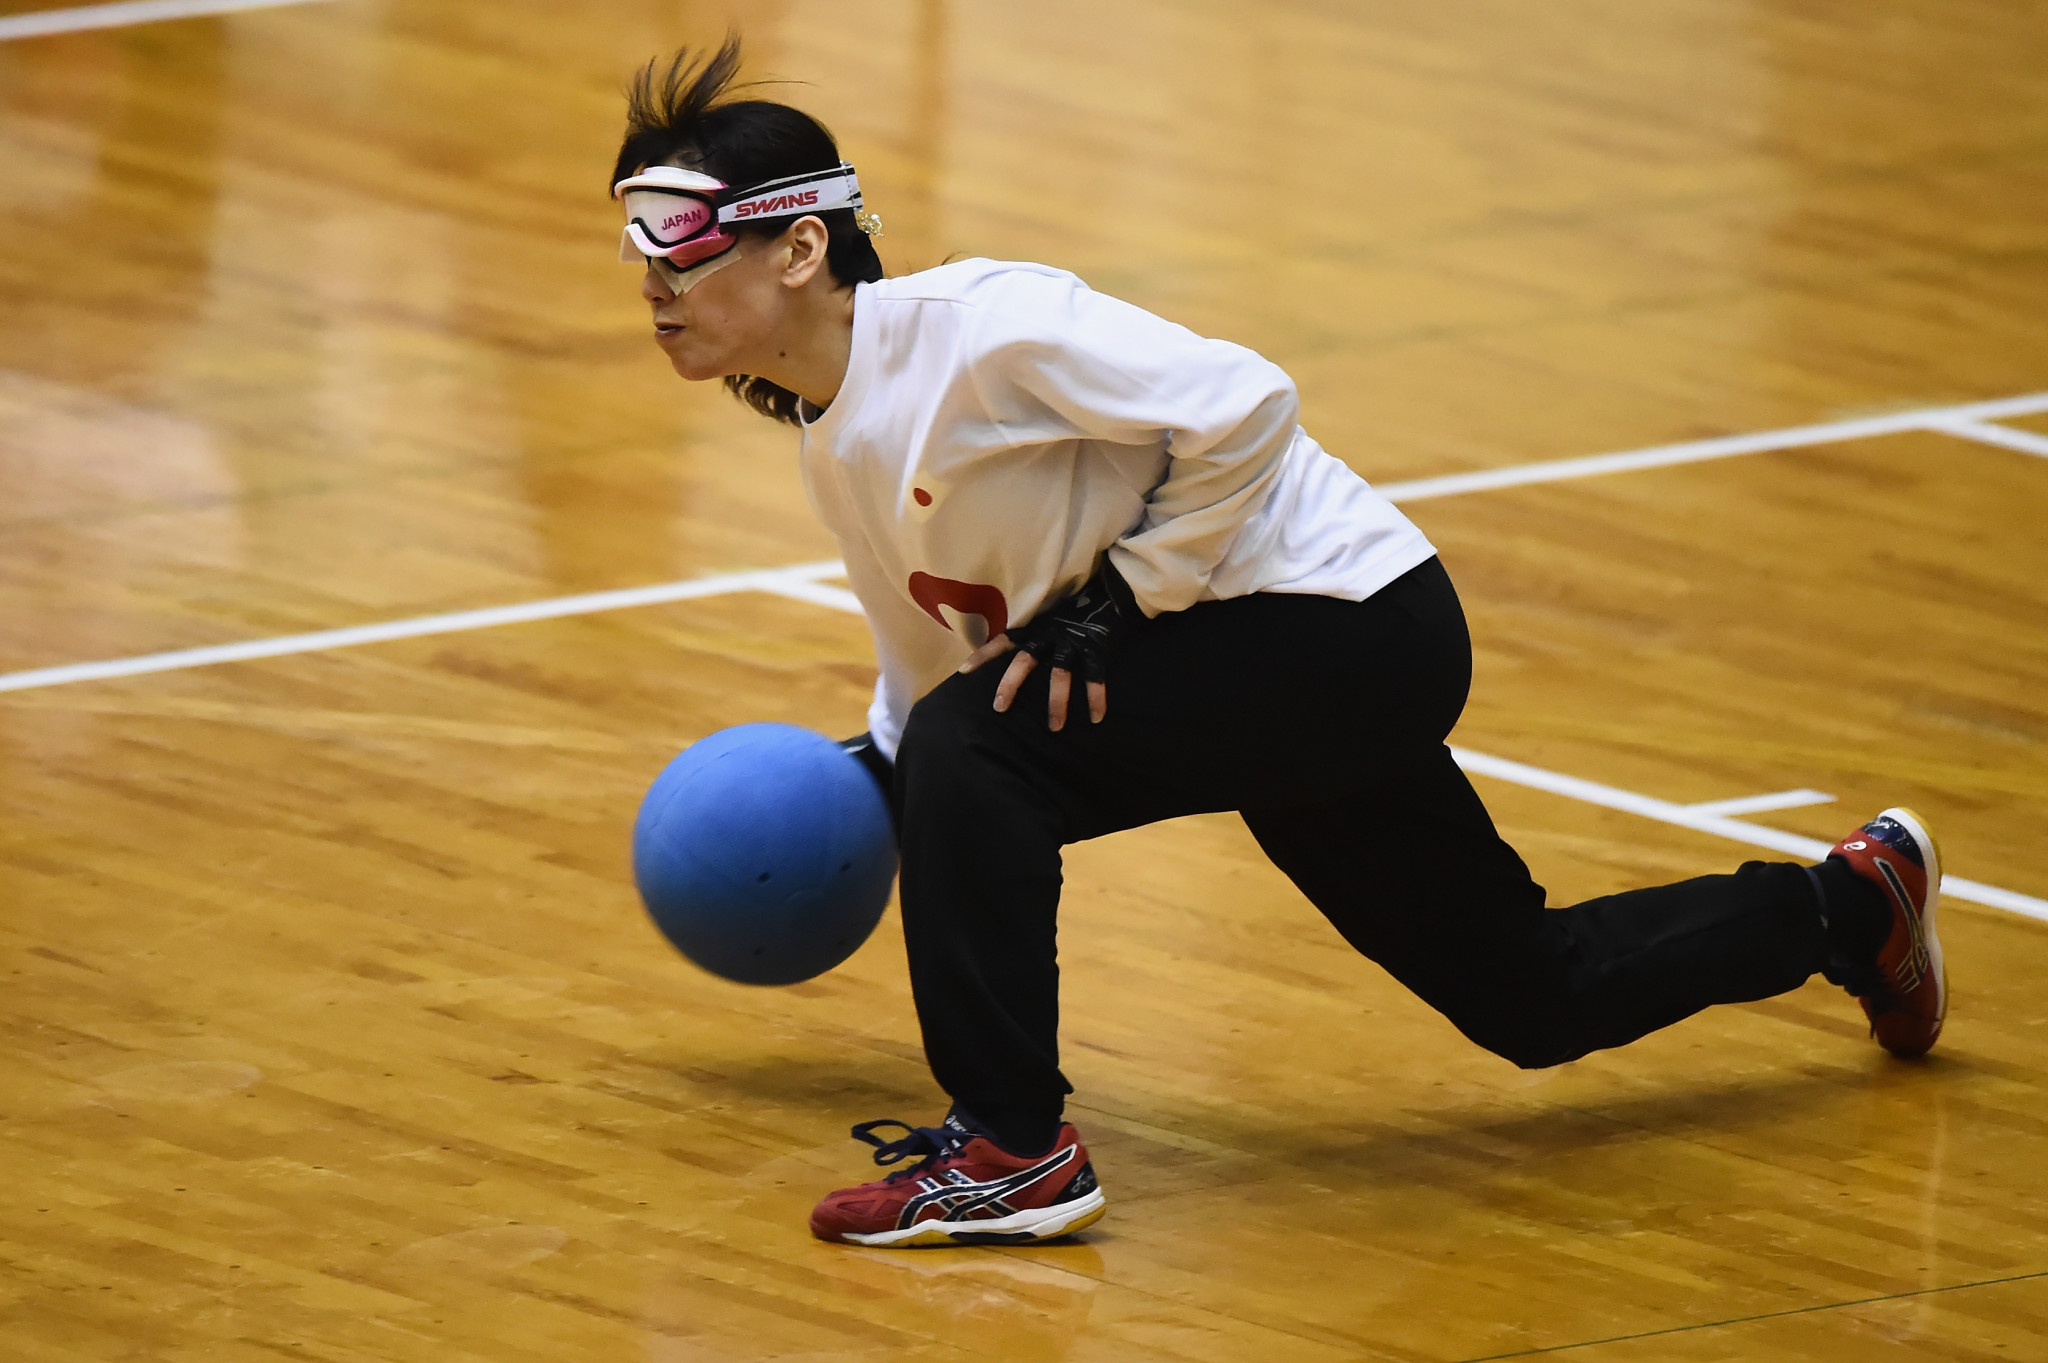 Goalball is among the sports governed by the IBSA and is set to feature at Paris 2024 ©Getty Images